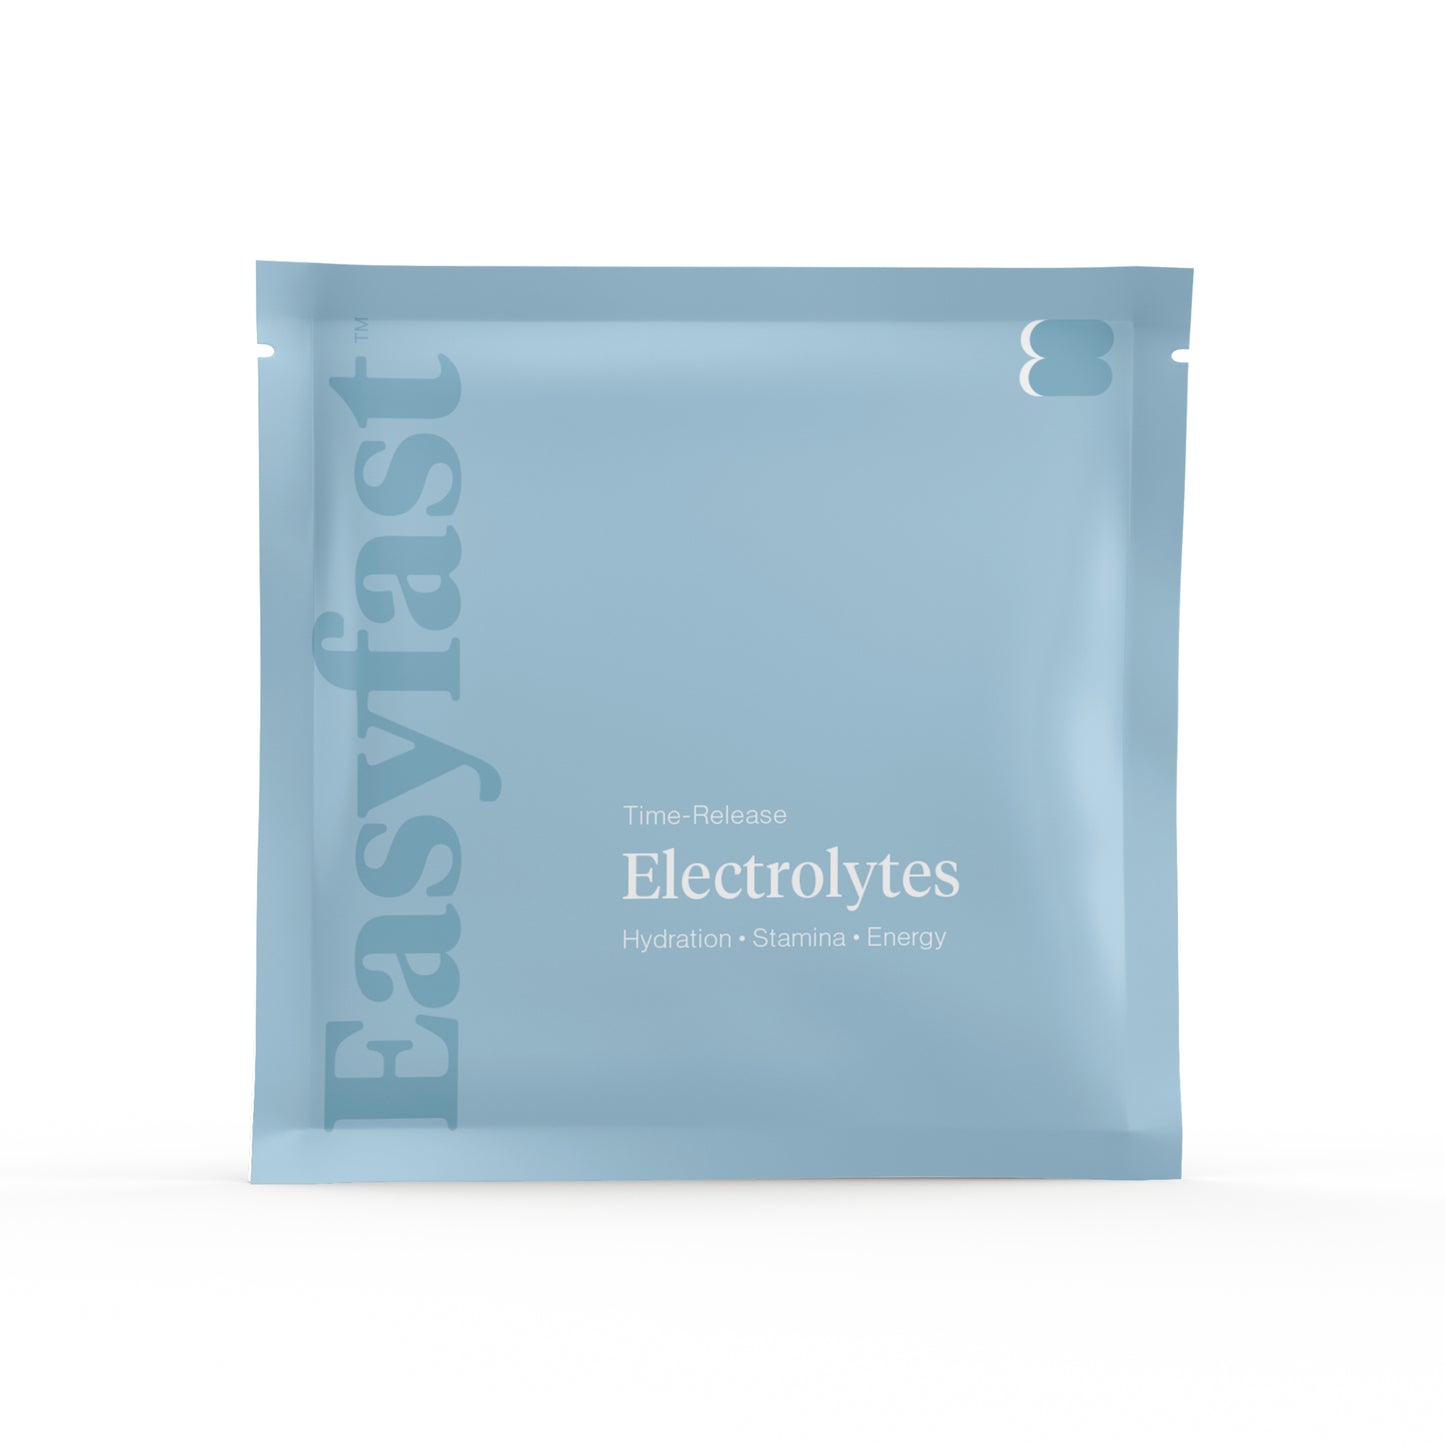 Time-Release Electrolytes